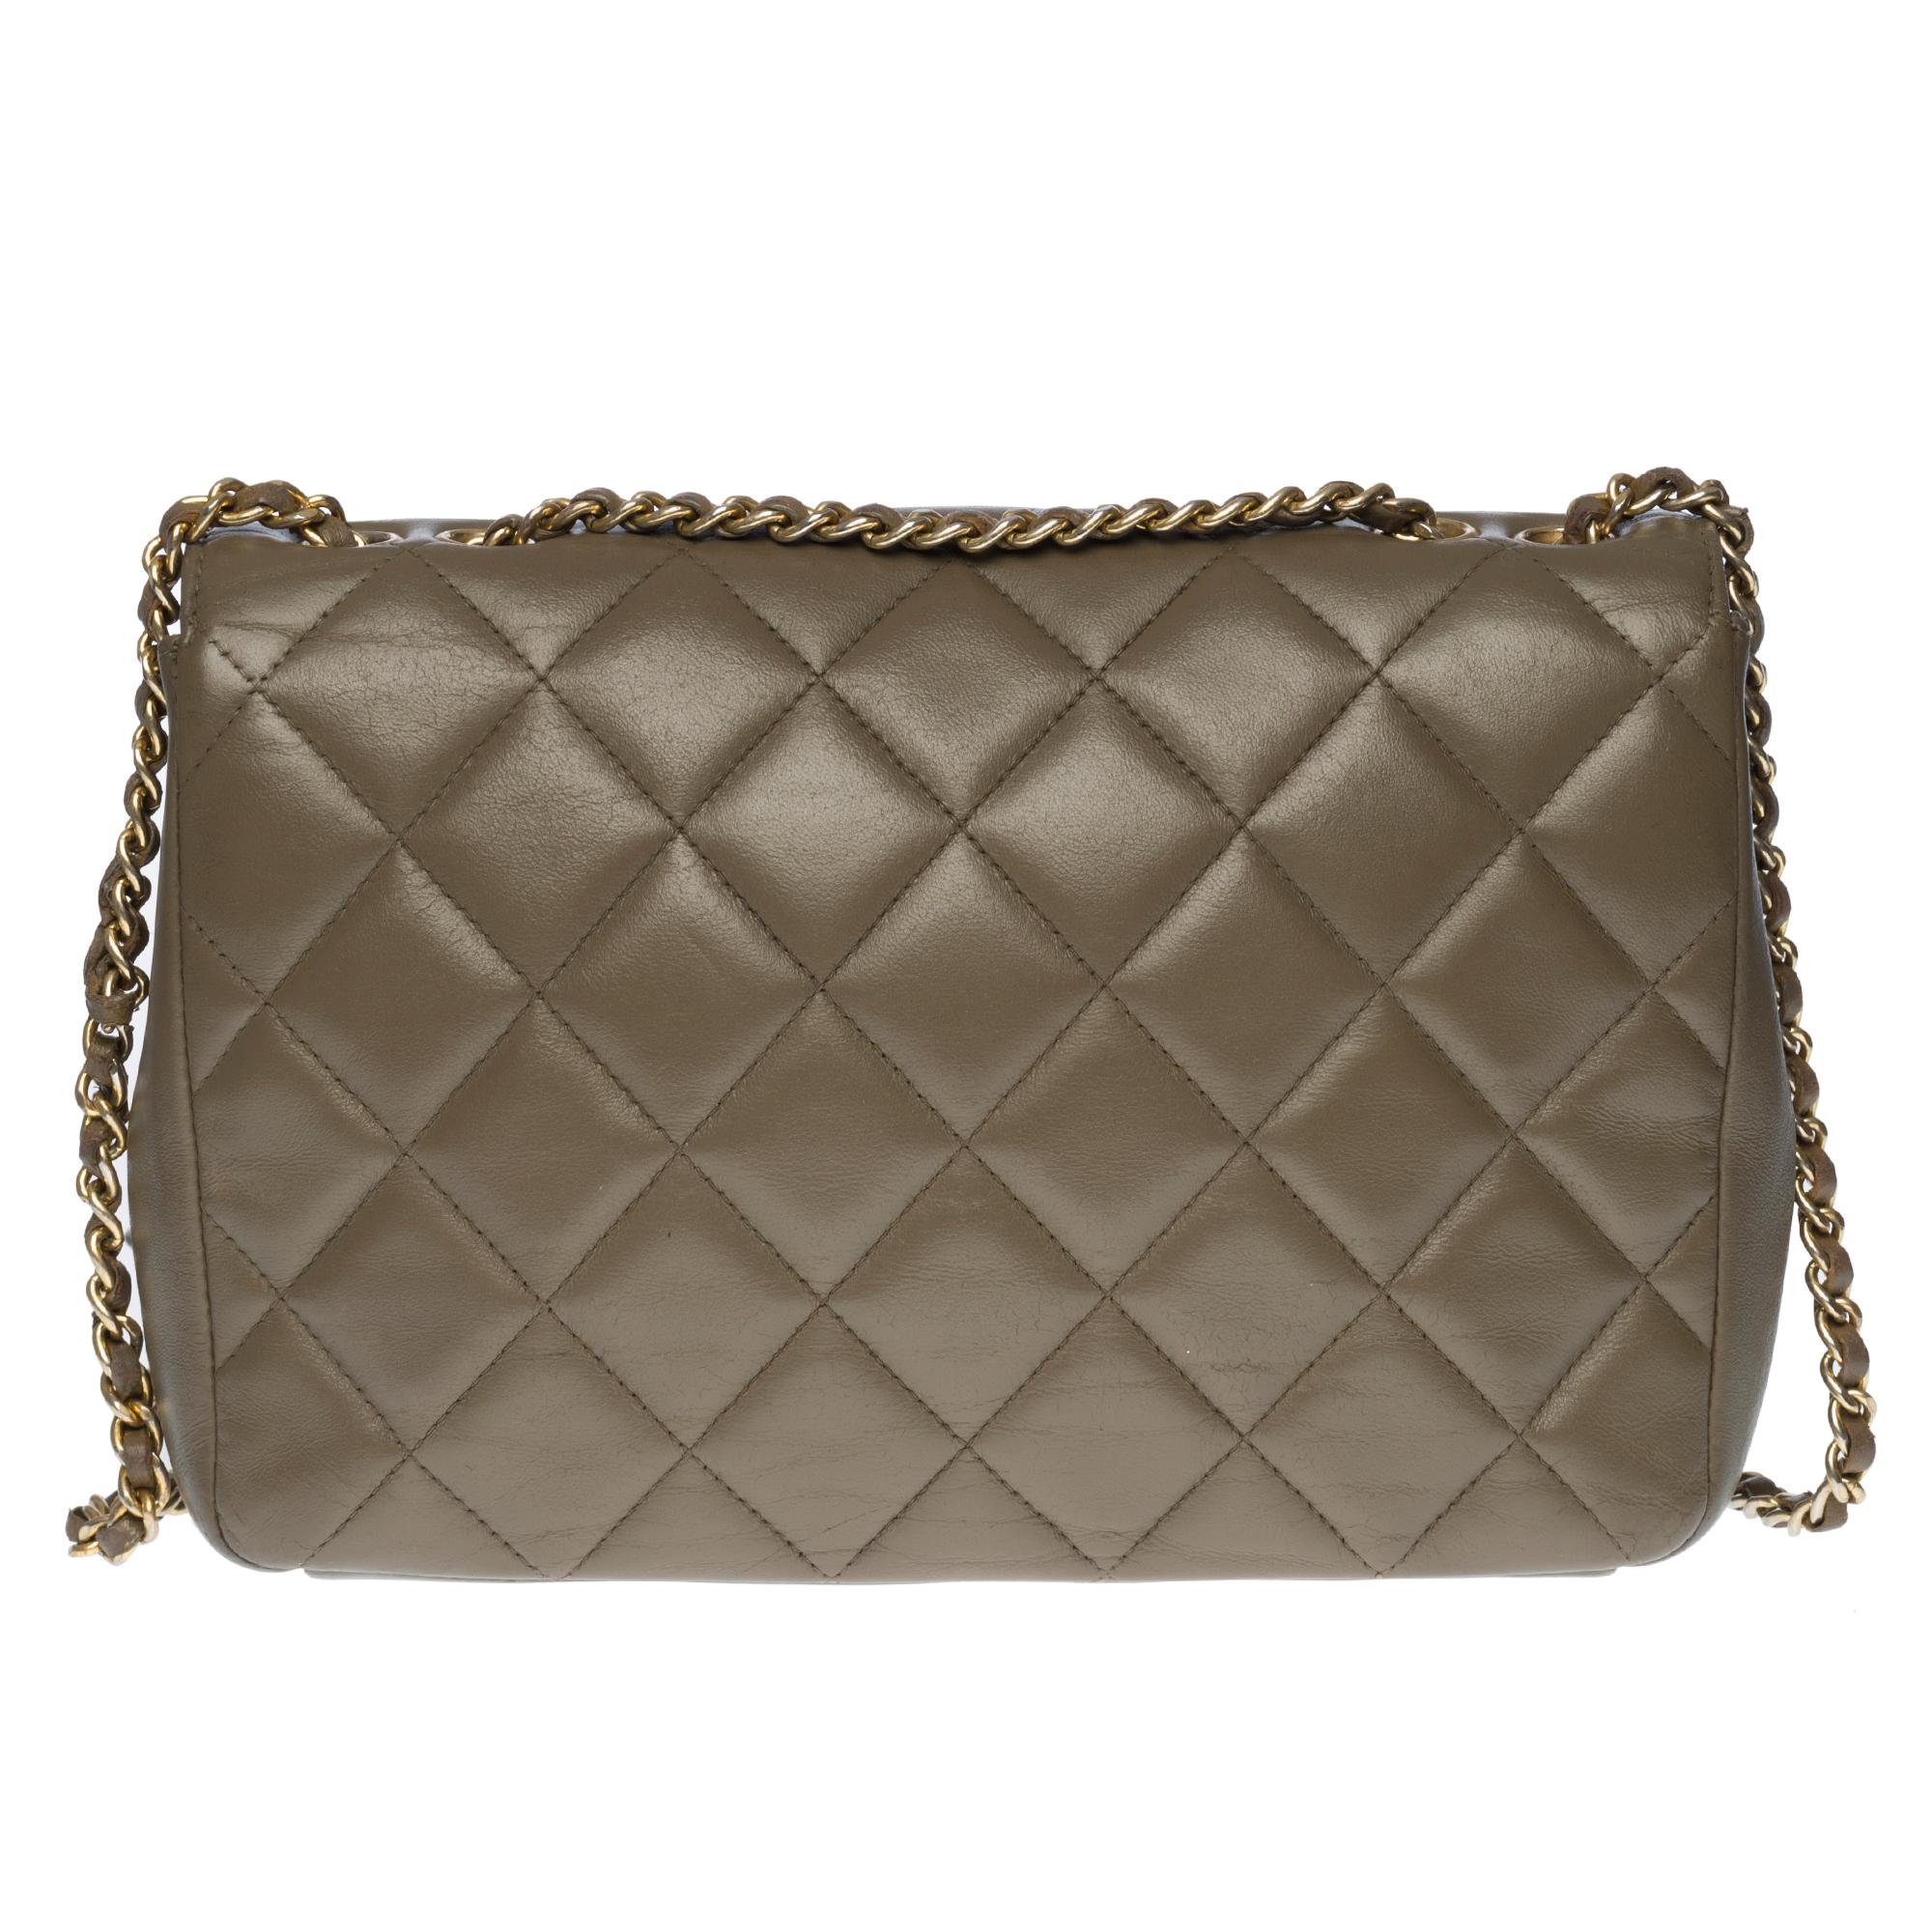 Lovely Chanel Classique full flap bag in Taupe (mix of grey and brown) quilted leather, silver metal trim, silver metal chain intertwined with grey leather for a hand, shoulder or shoulder strap.
Flap closure and 2 snap buttons.
Lining in burgundy